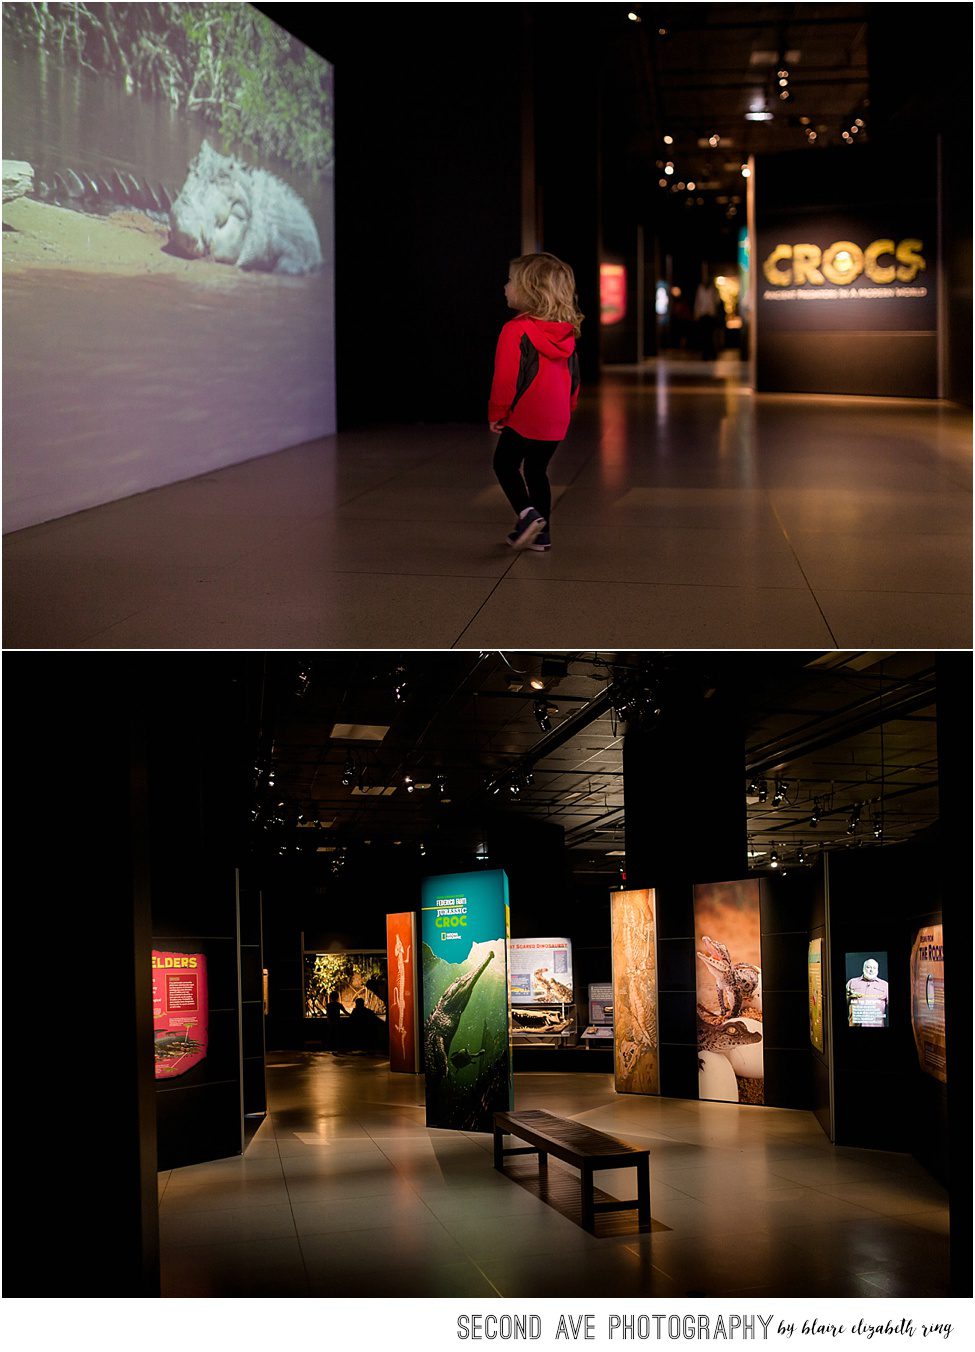 Documentary photos of the CROCS Exhibit at the National Geographic Museum in Washington, DC.